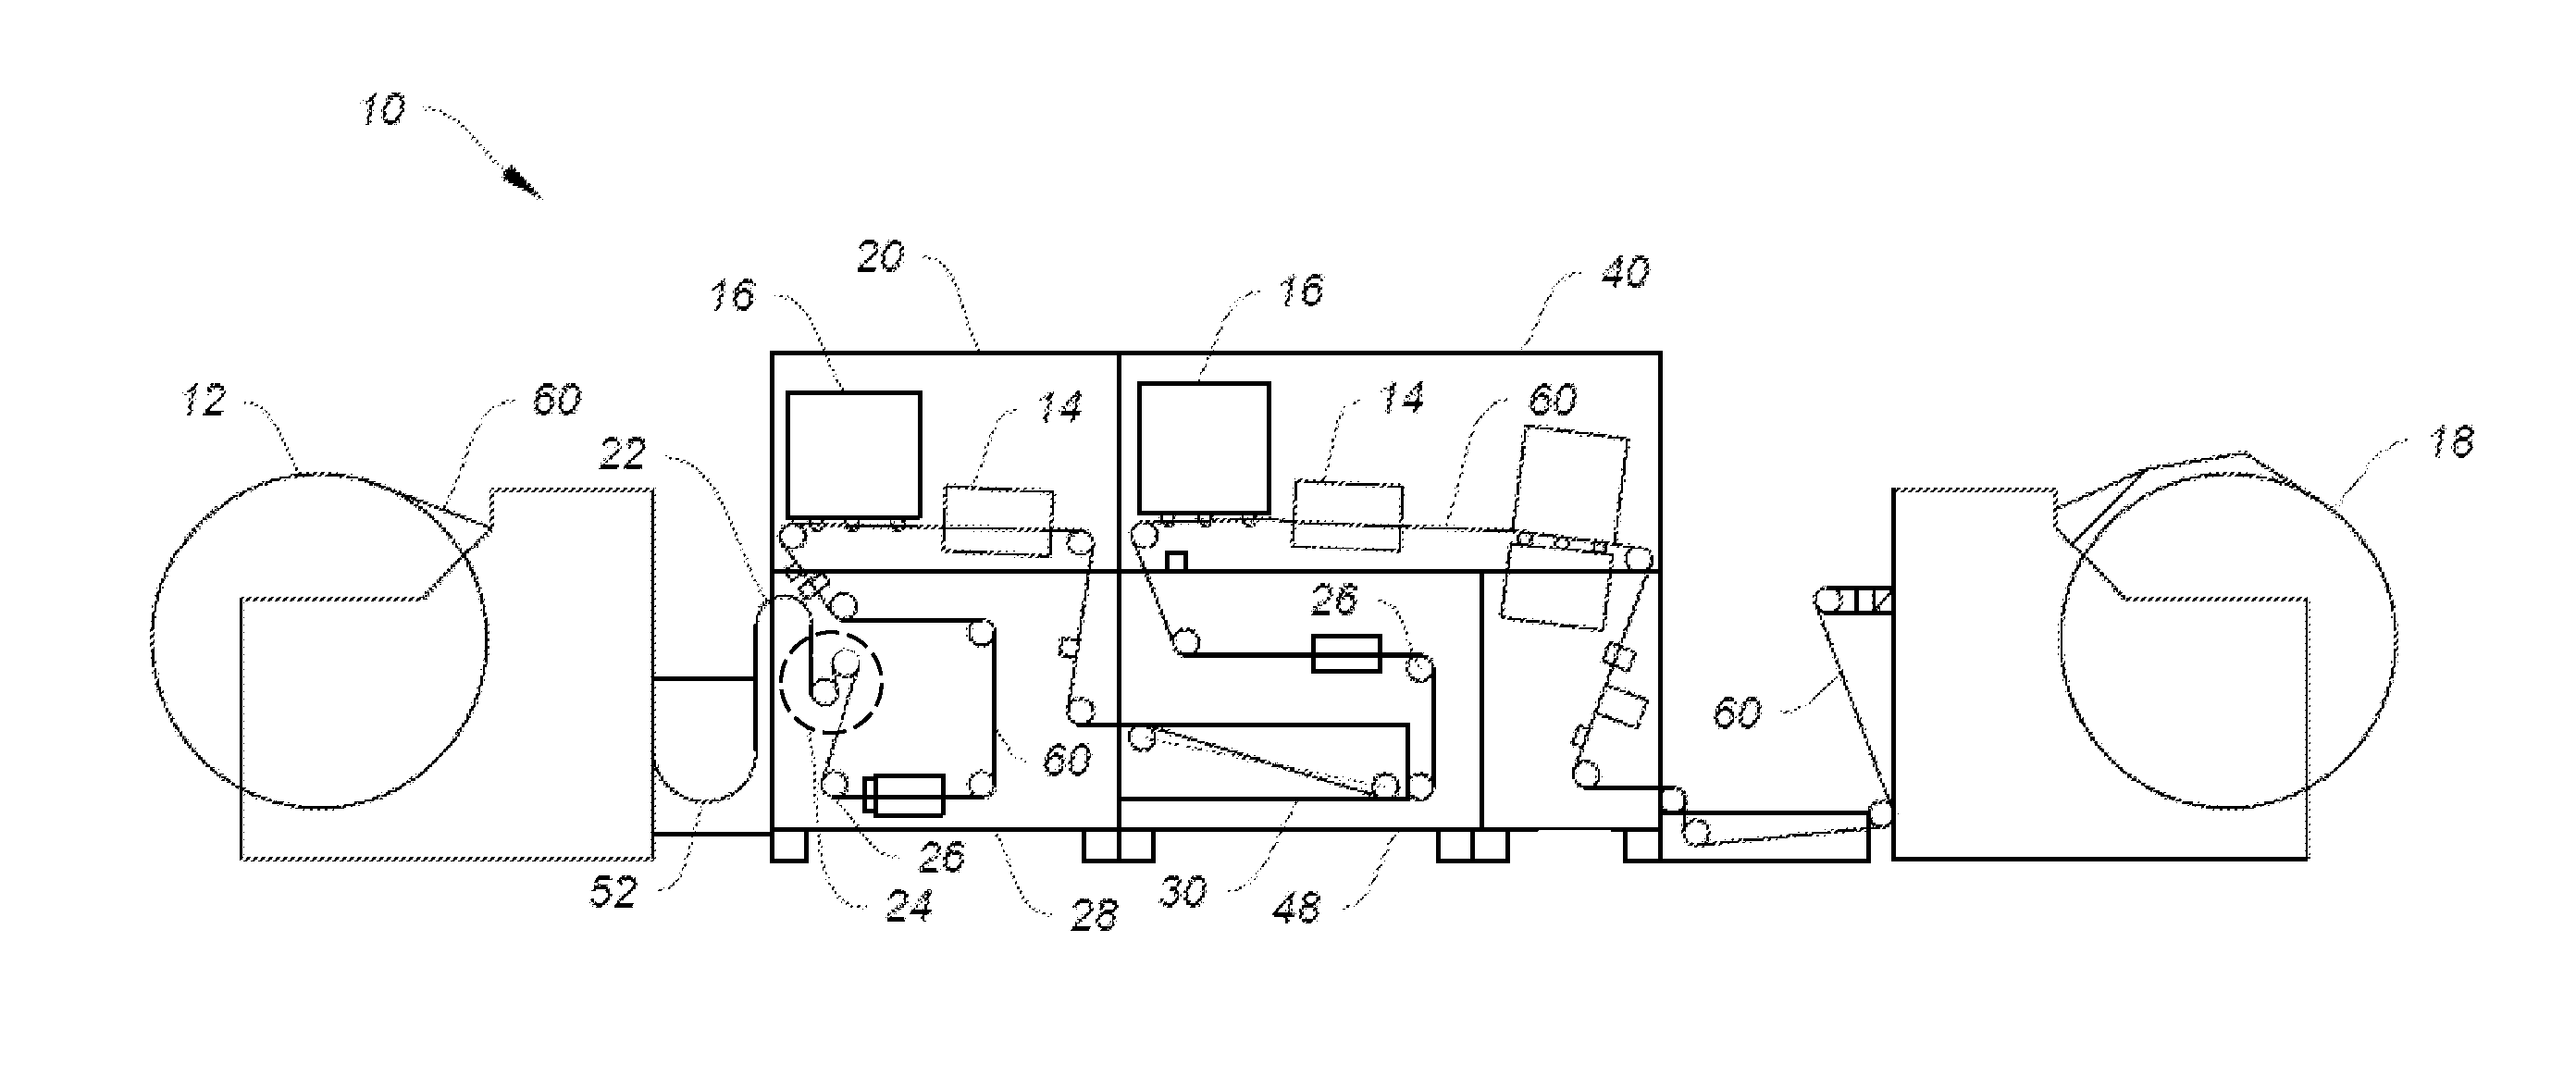 Method for automatically-adjusting web media tension